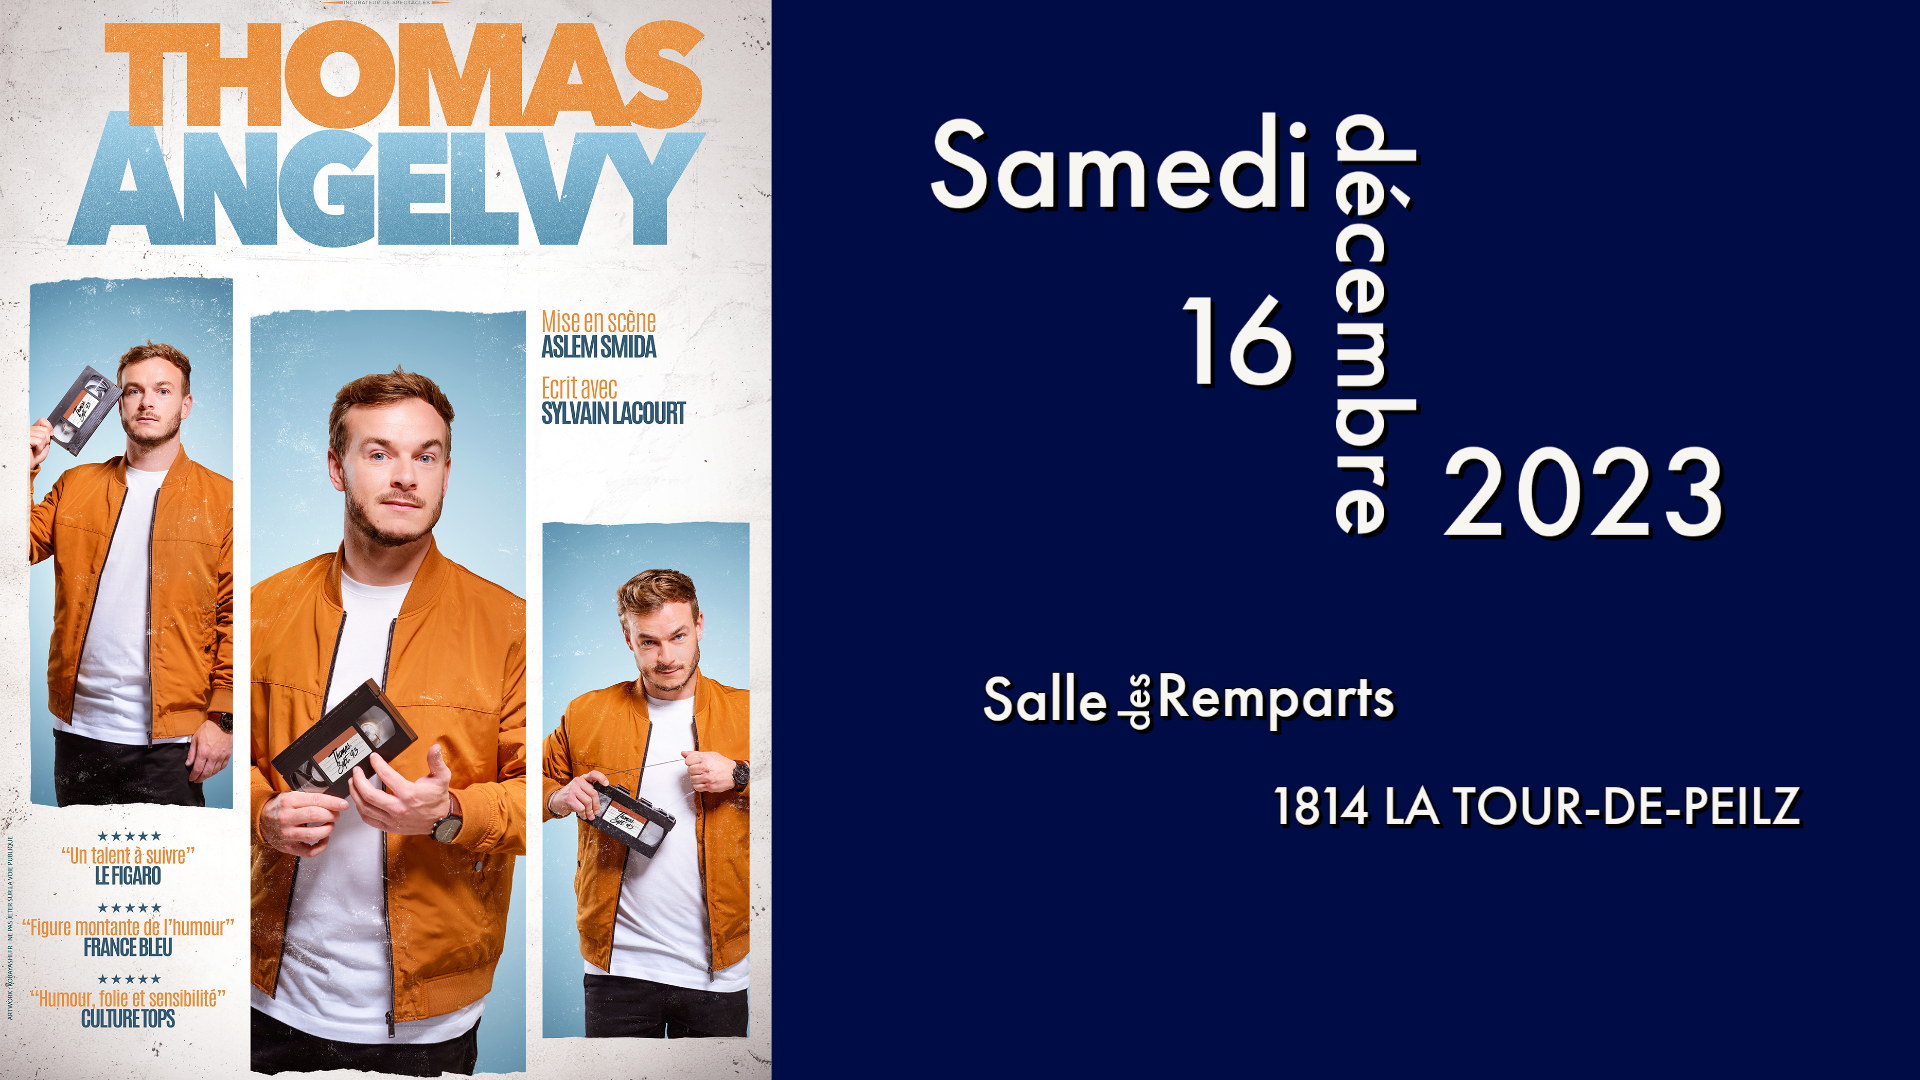 COMPLET - Spectacle humour - Thomas Angelvy